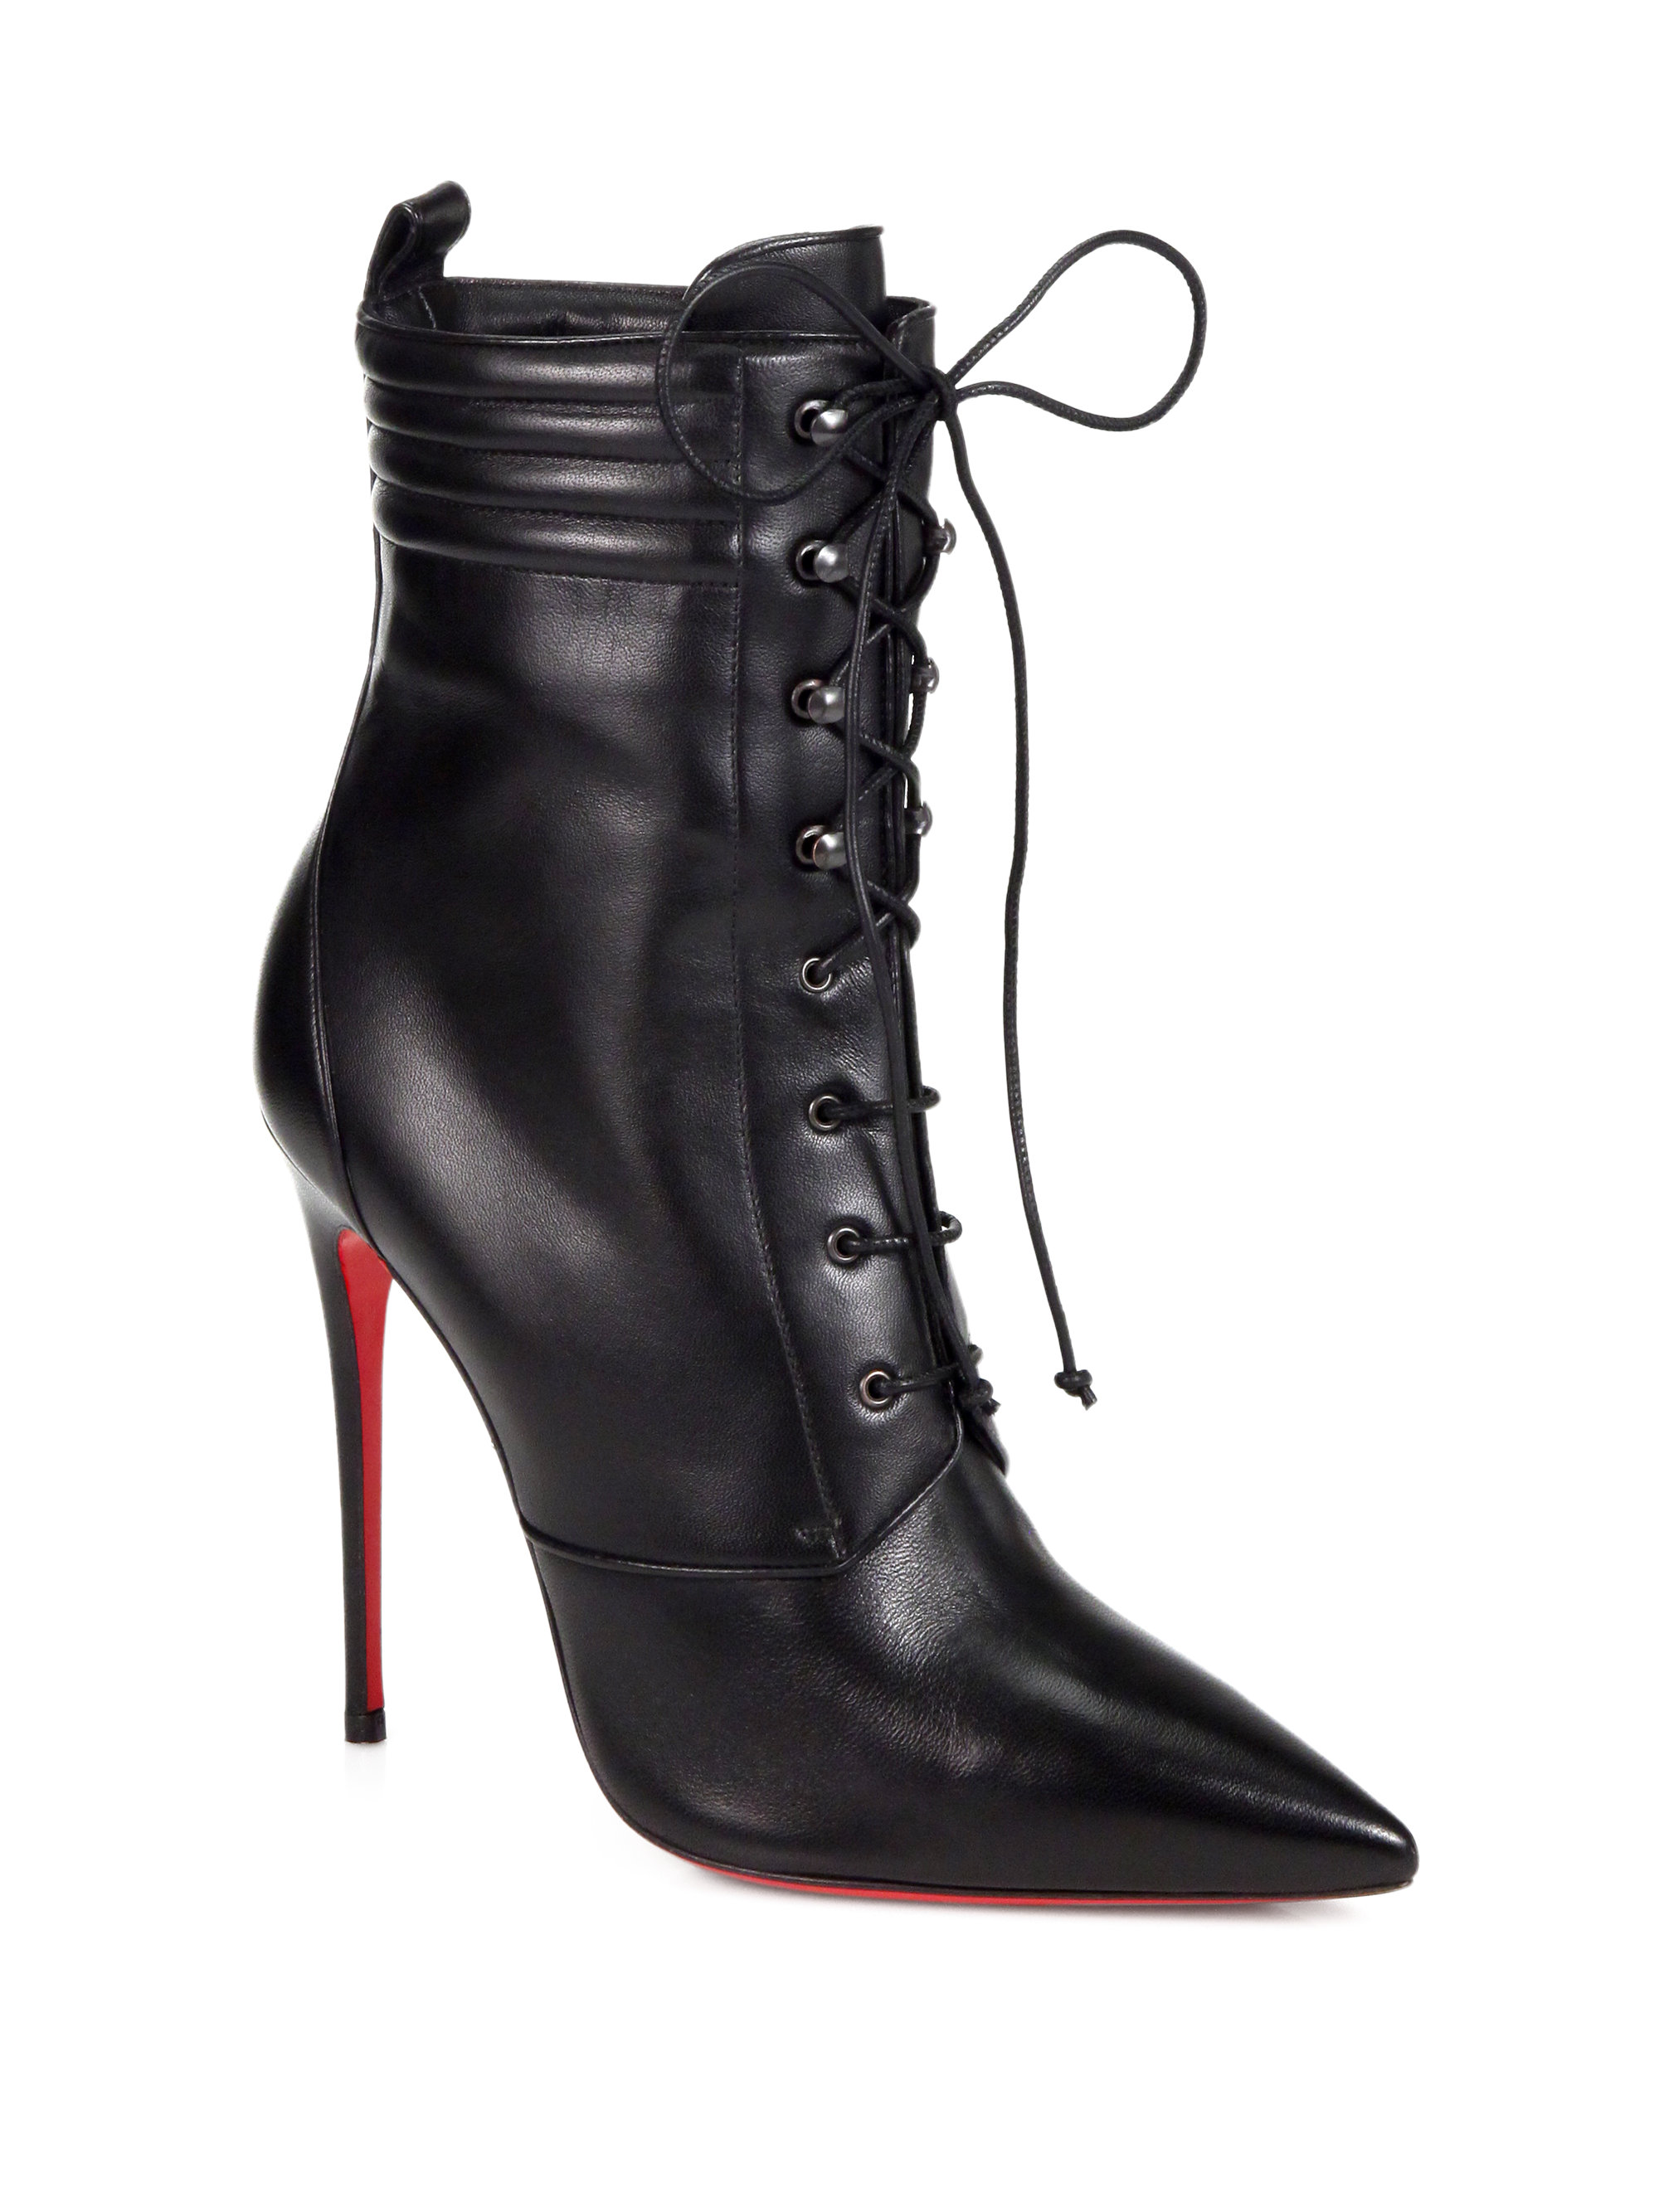 Christian Louboutin Mado Leather Lace up Ankle Boots in Black - Lyst